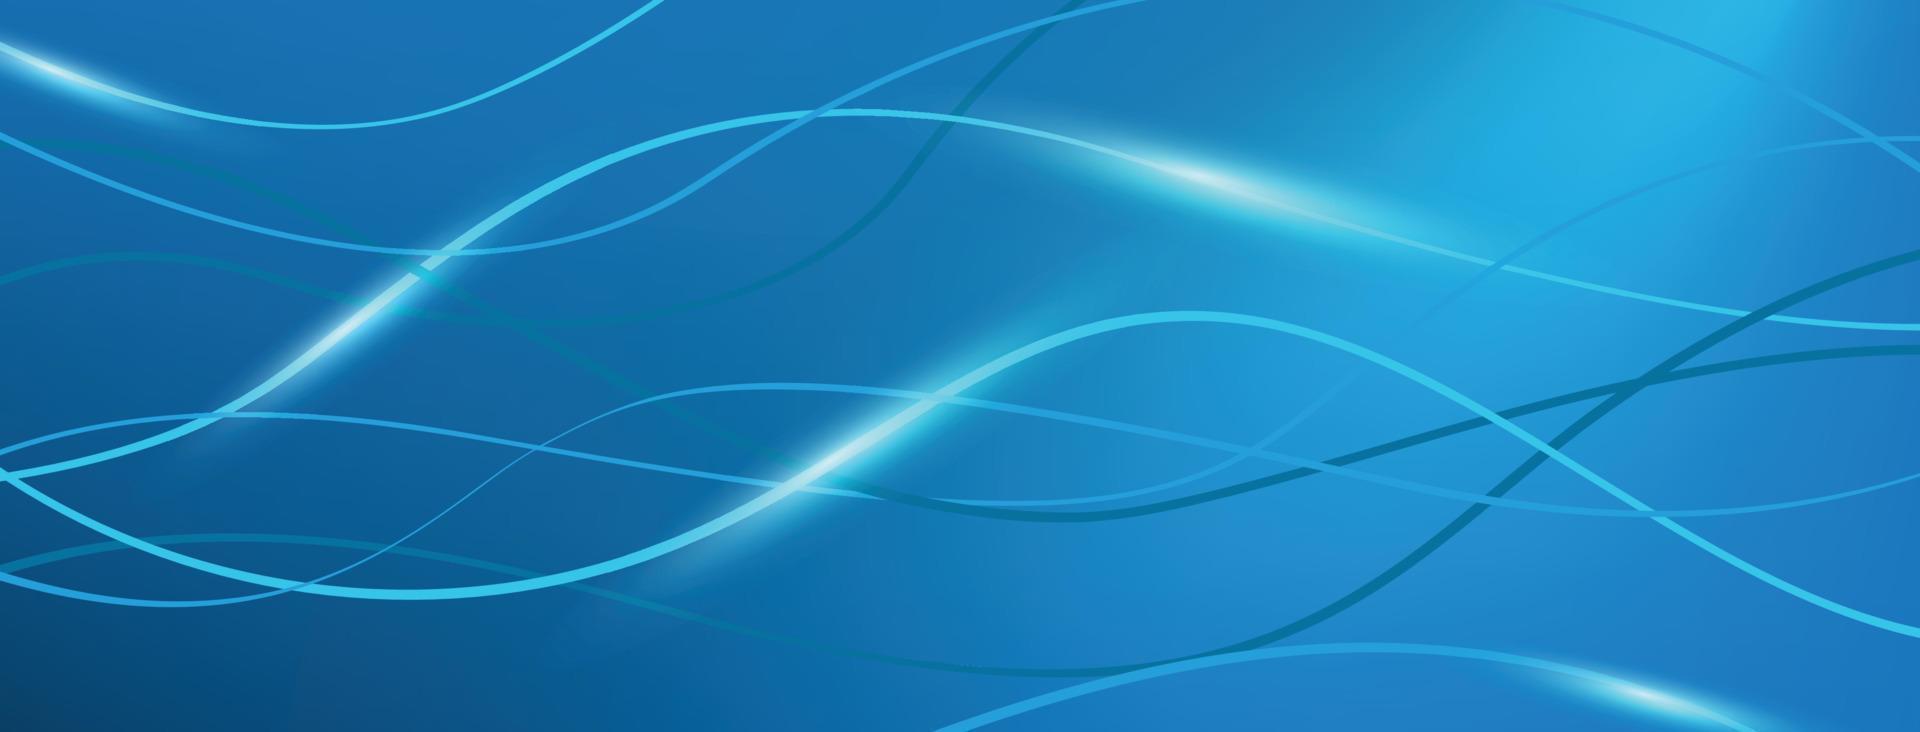 Blue wave abstract background layout banner vector